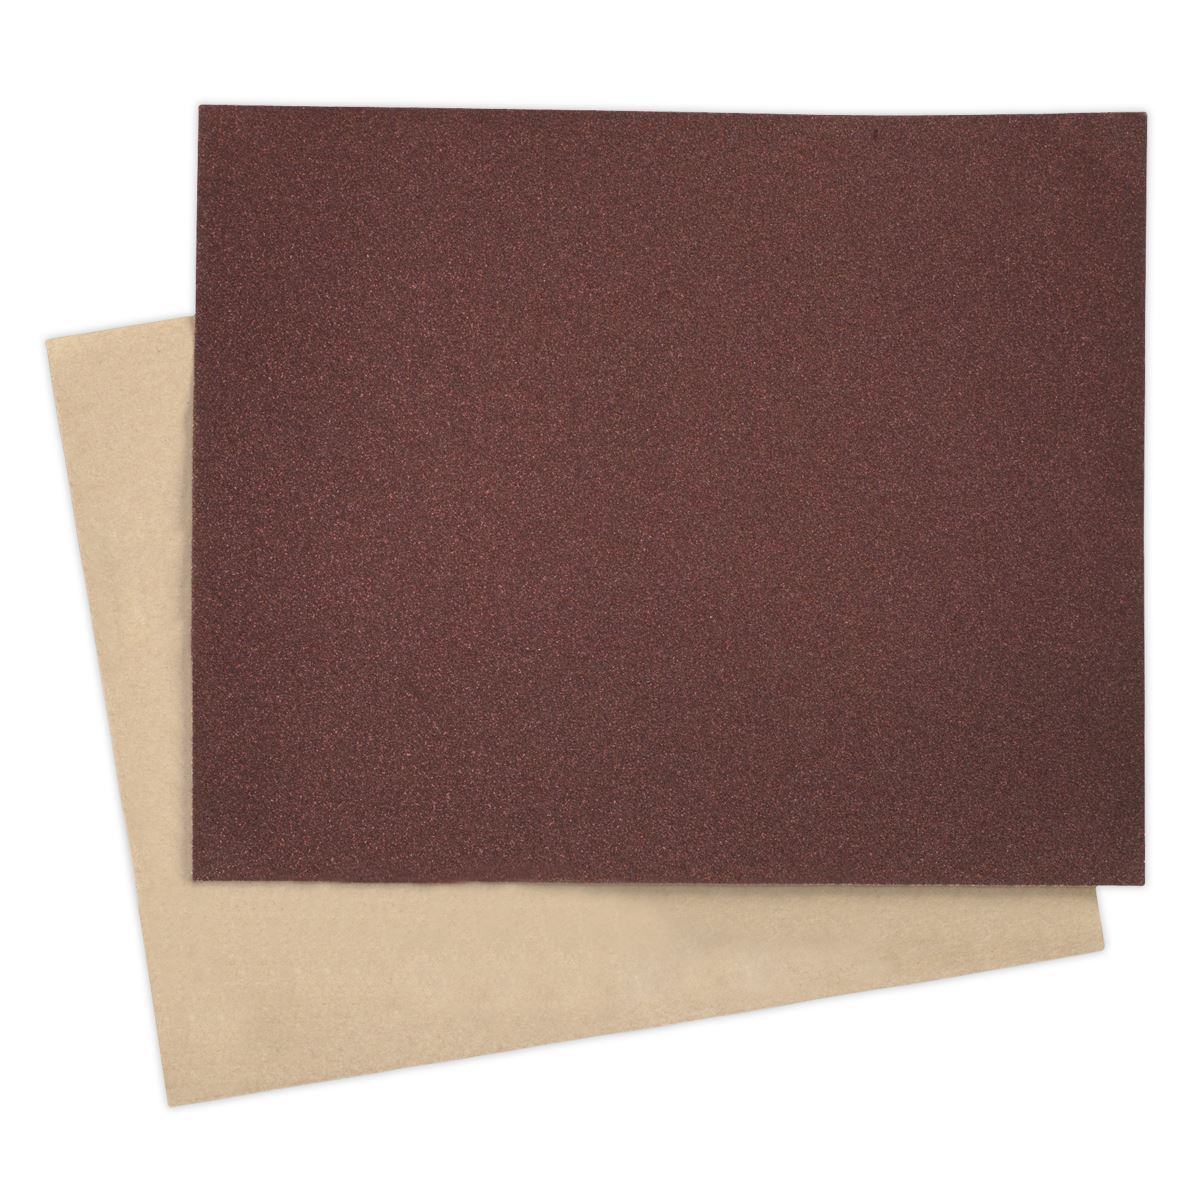 Sealey Production Paper 230 x 280mm 80Grit Pack of 25